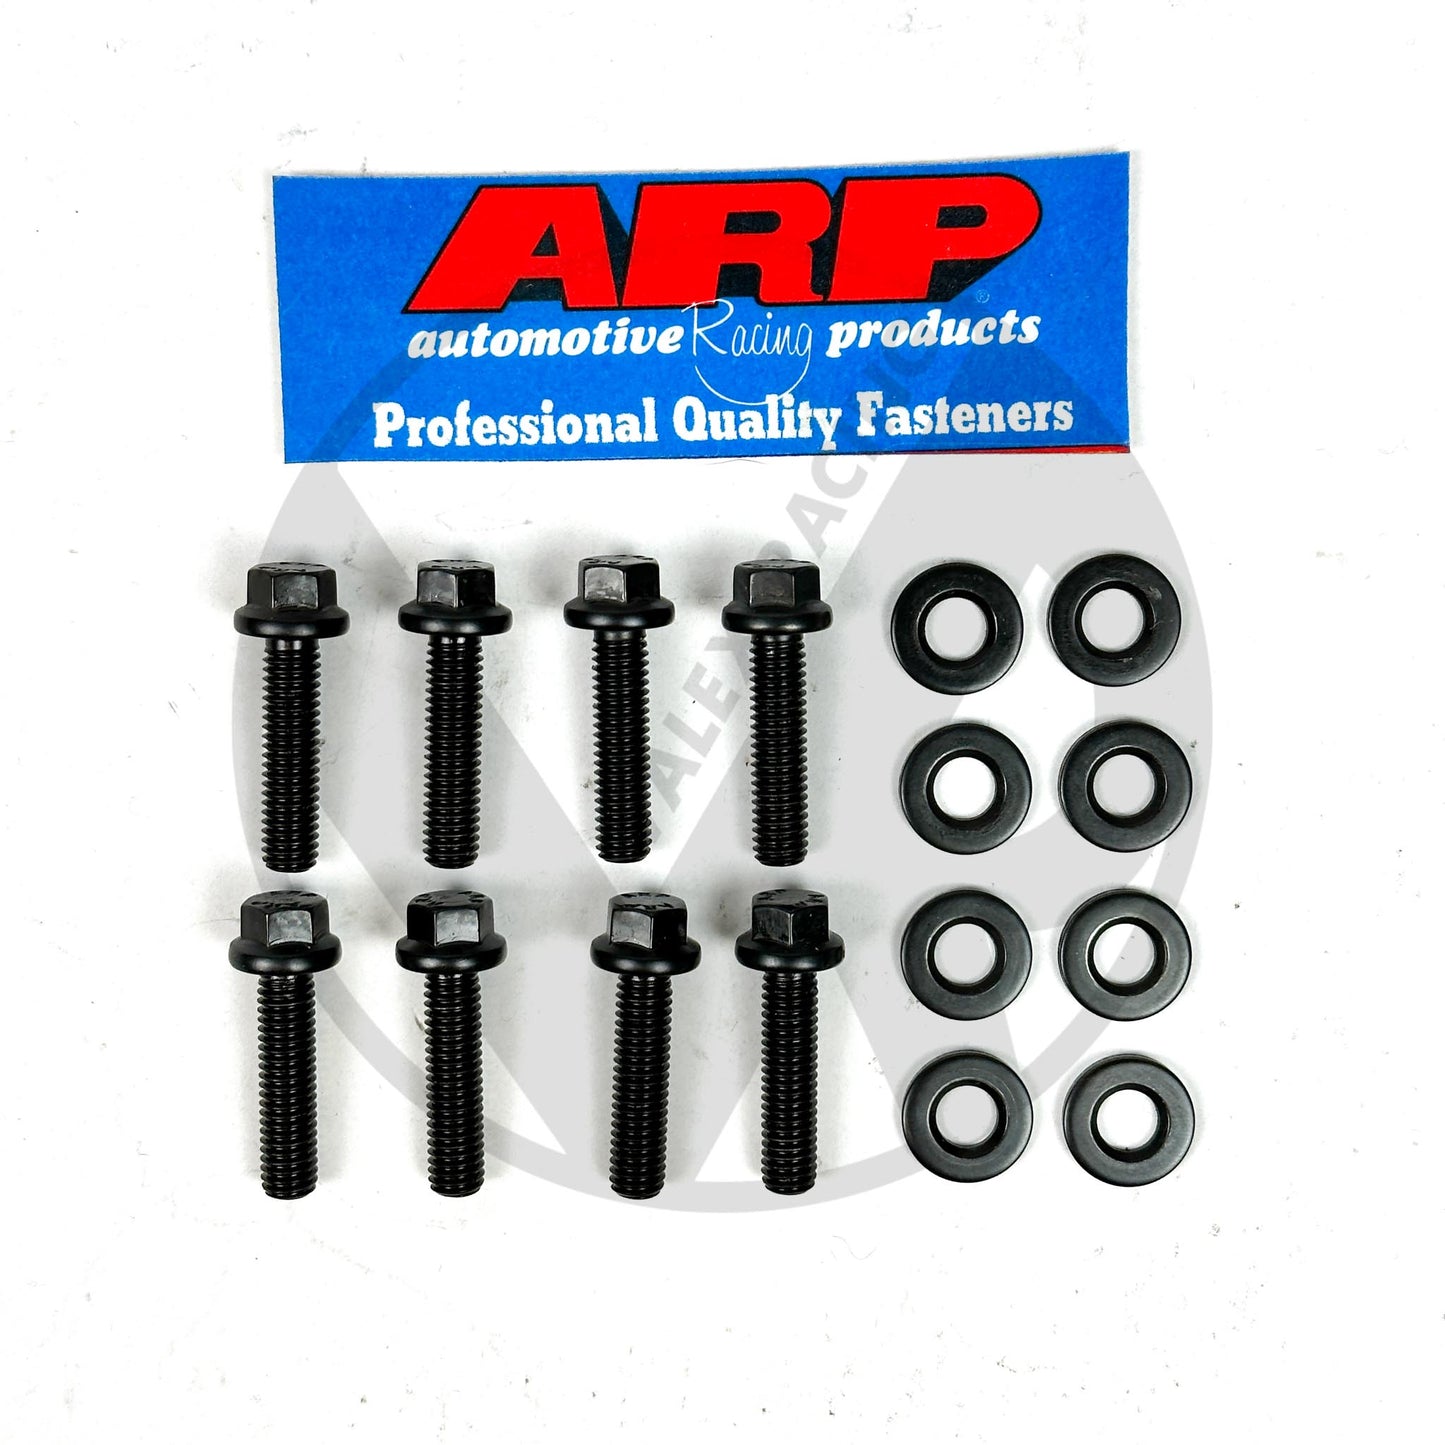 ARP Bolts Upgrade for Skunk2 Tuner Front Camber Kit Ball Joints Honda Civic Acura Integra